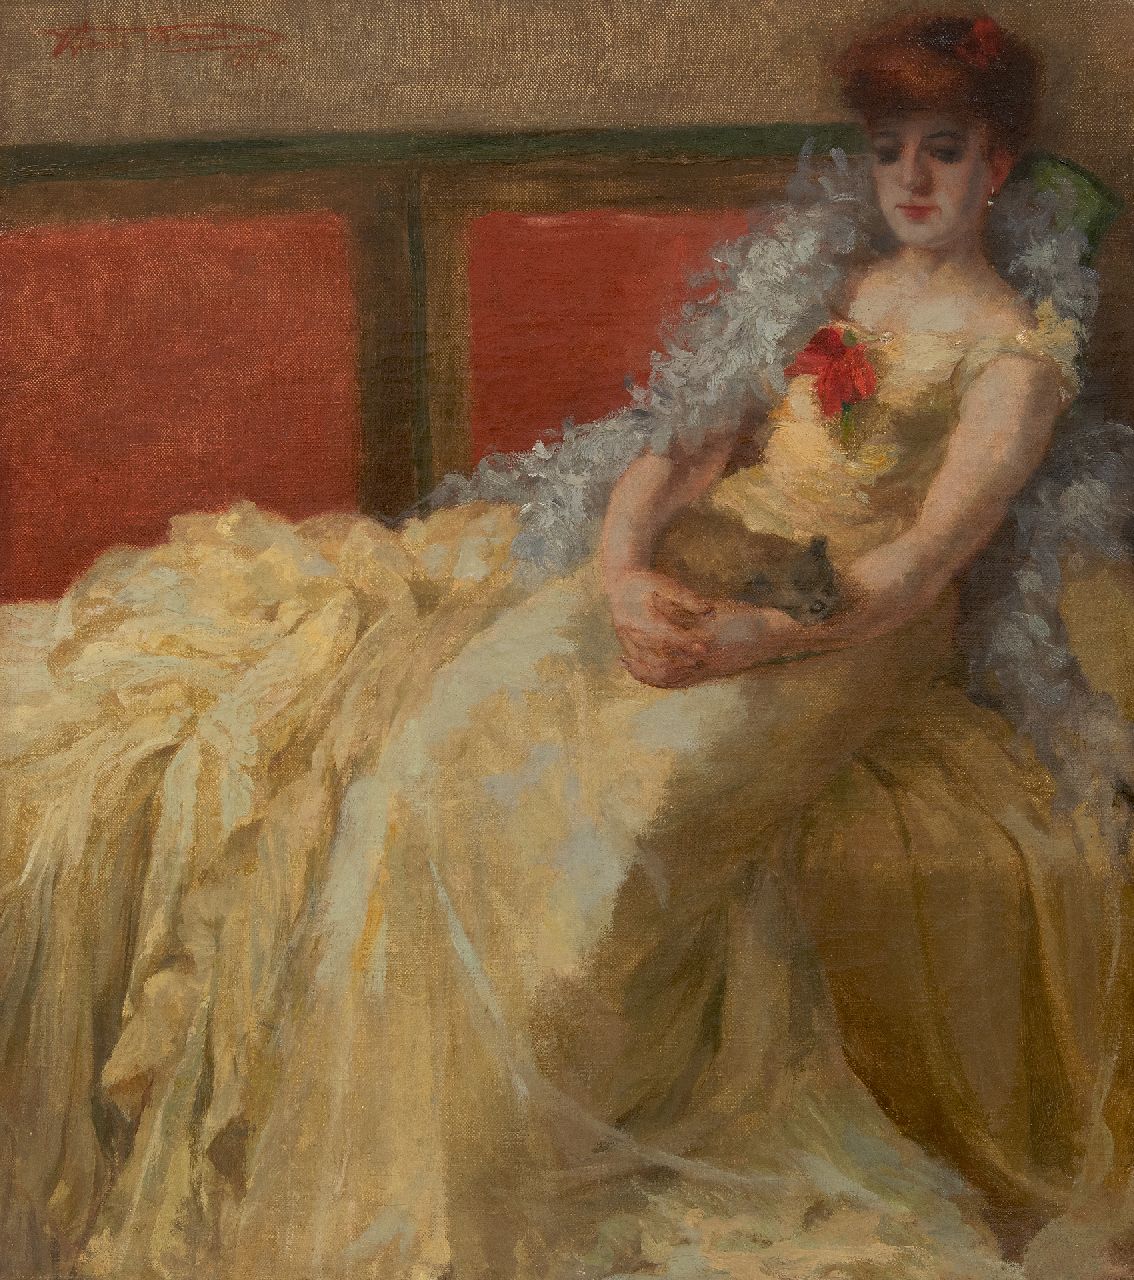 Thomas H.J.  | Henri Joseph Thomas | Paintings offered for sale | Woman in a ball gown with a dog on her lap, oil on canvas 56.9 x 50.5 cm, signed u.l. and dated 1924